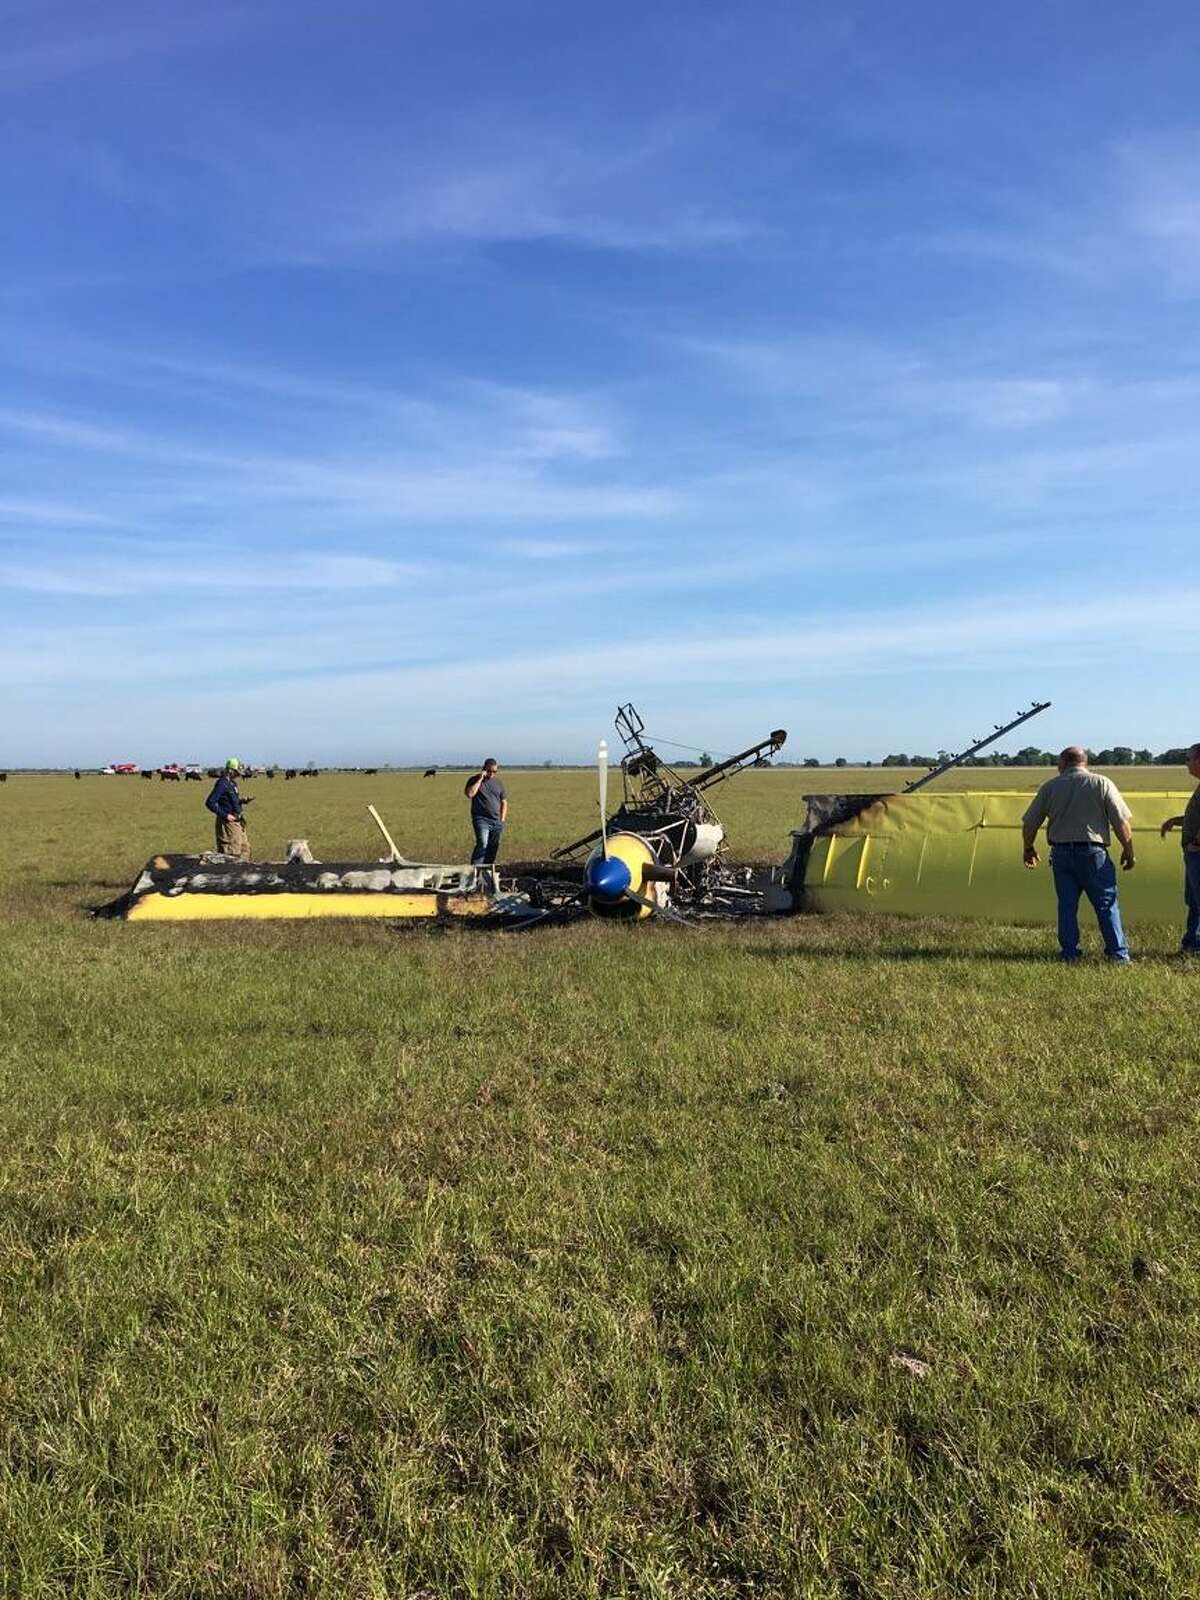 A plane crashed and caught fire in a Jefferson County field about 8:30 a.m. Saturday, April 8, 2017.